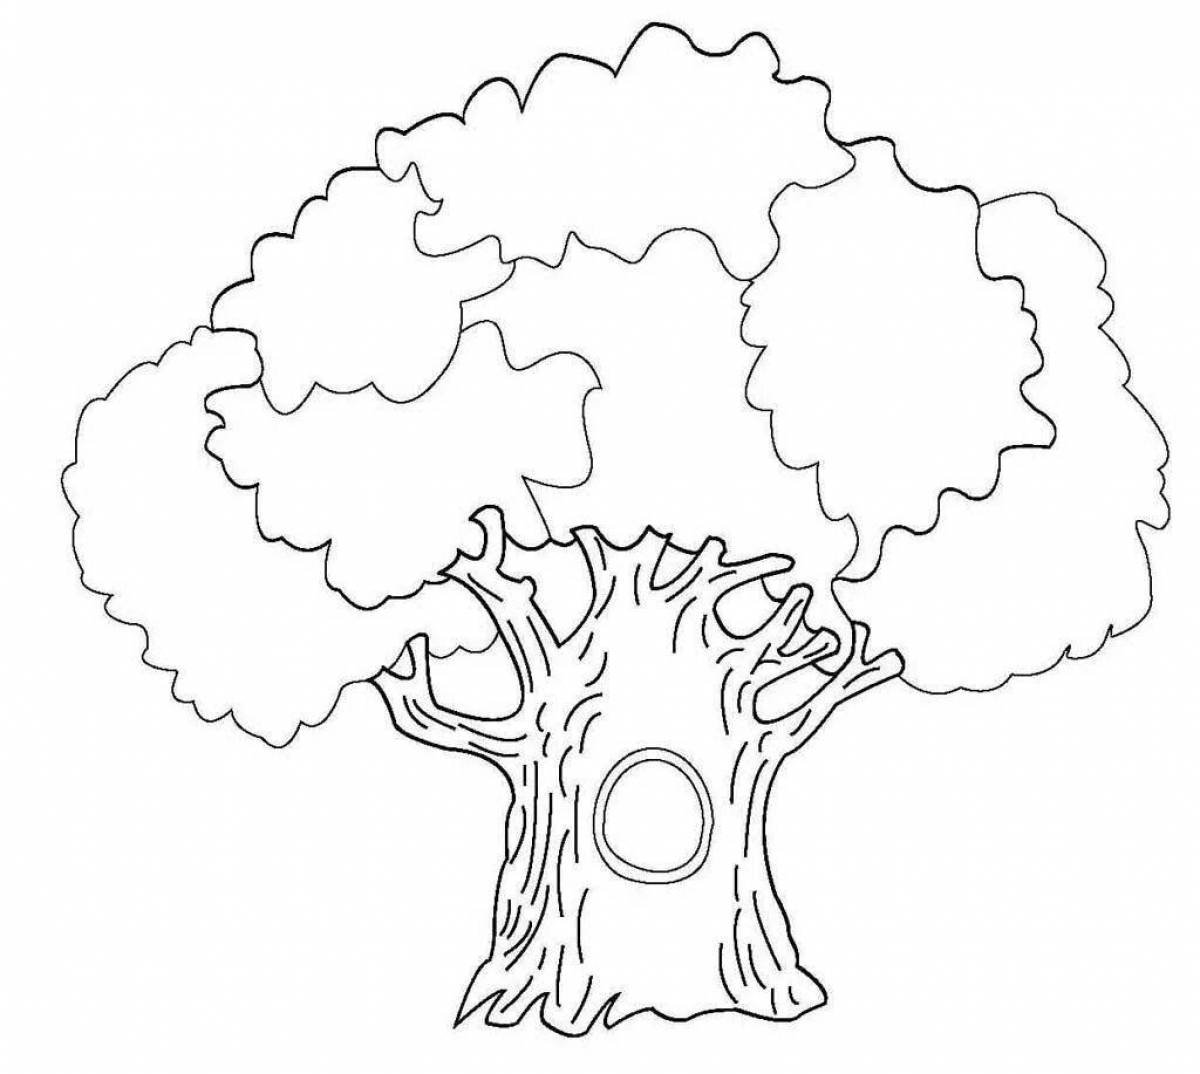 Fairy tree coloring book for kids